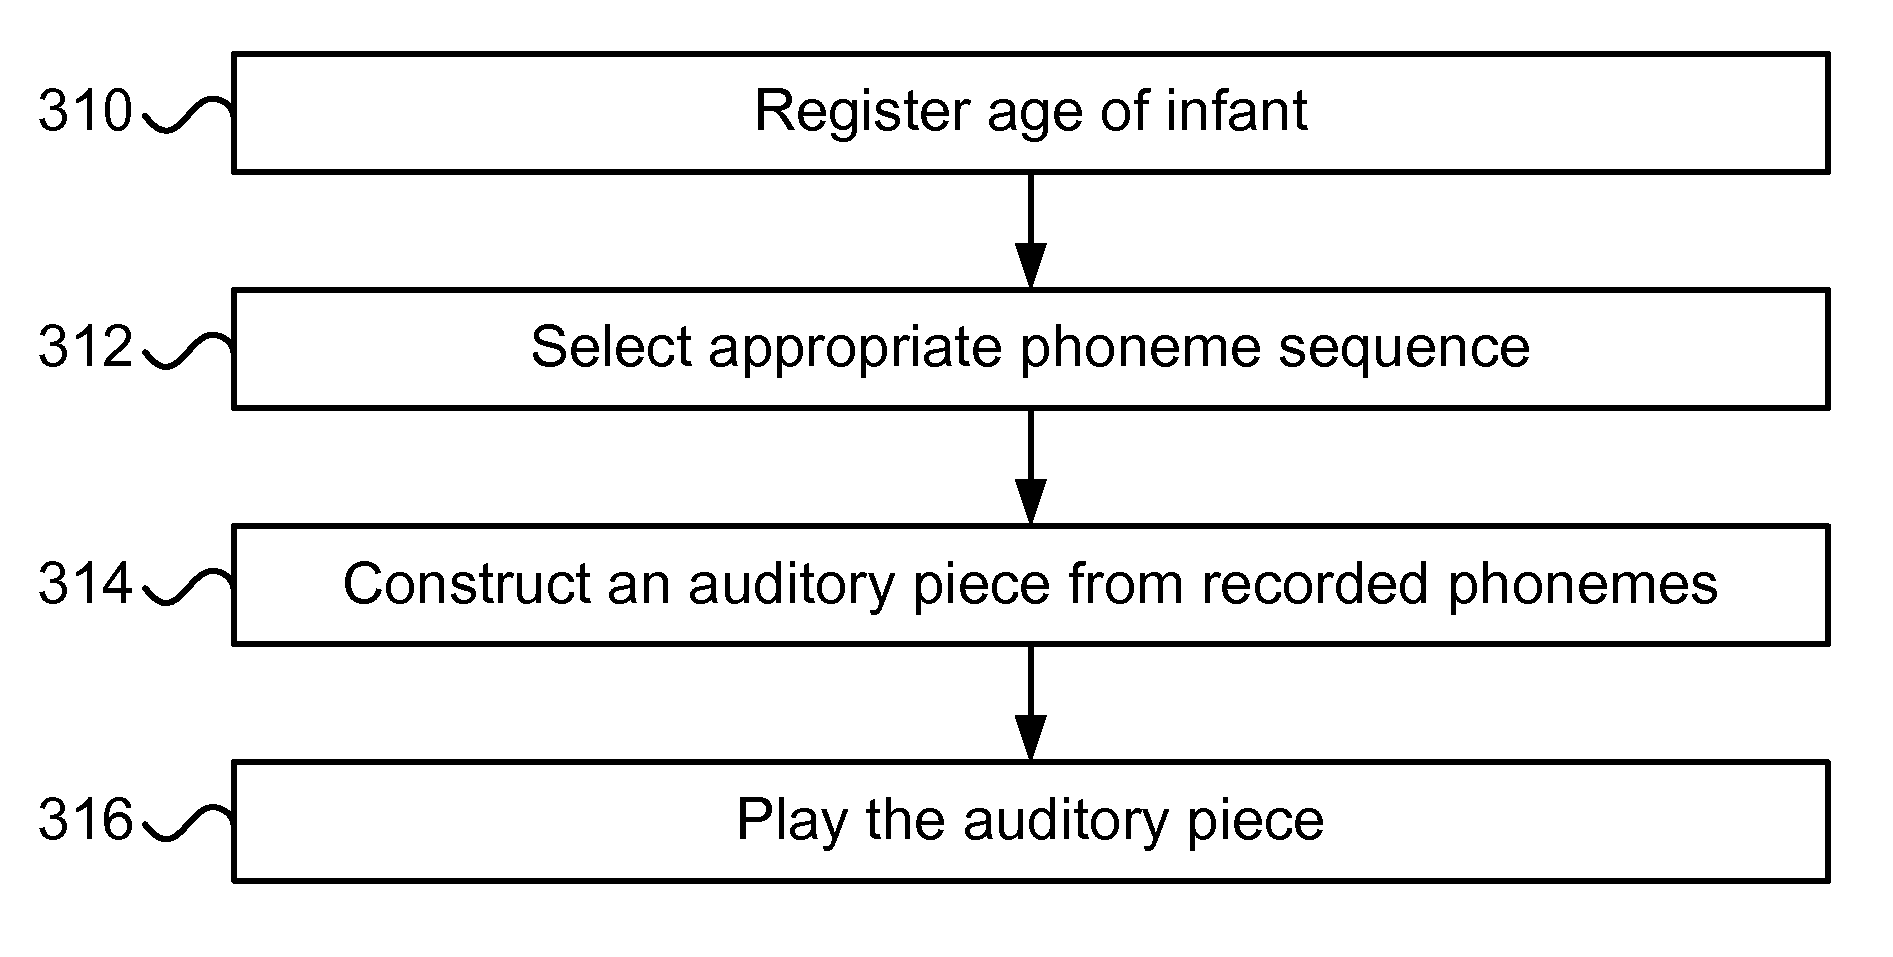 Infant photo to improve infant-directed speech recordings